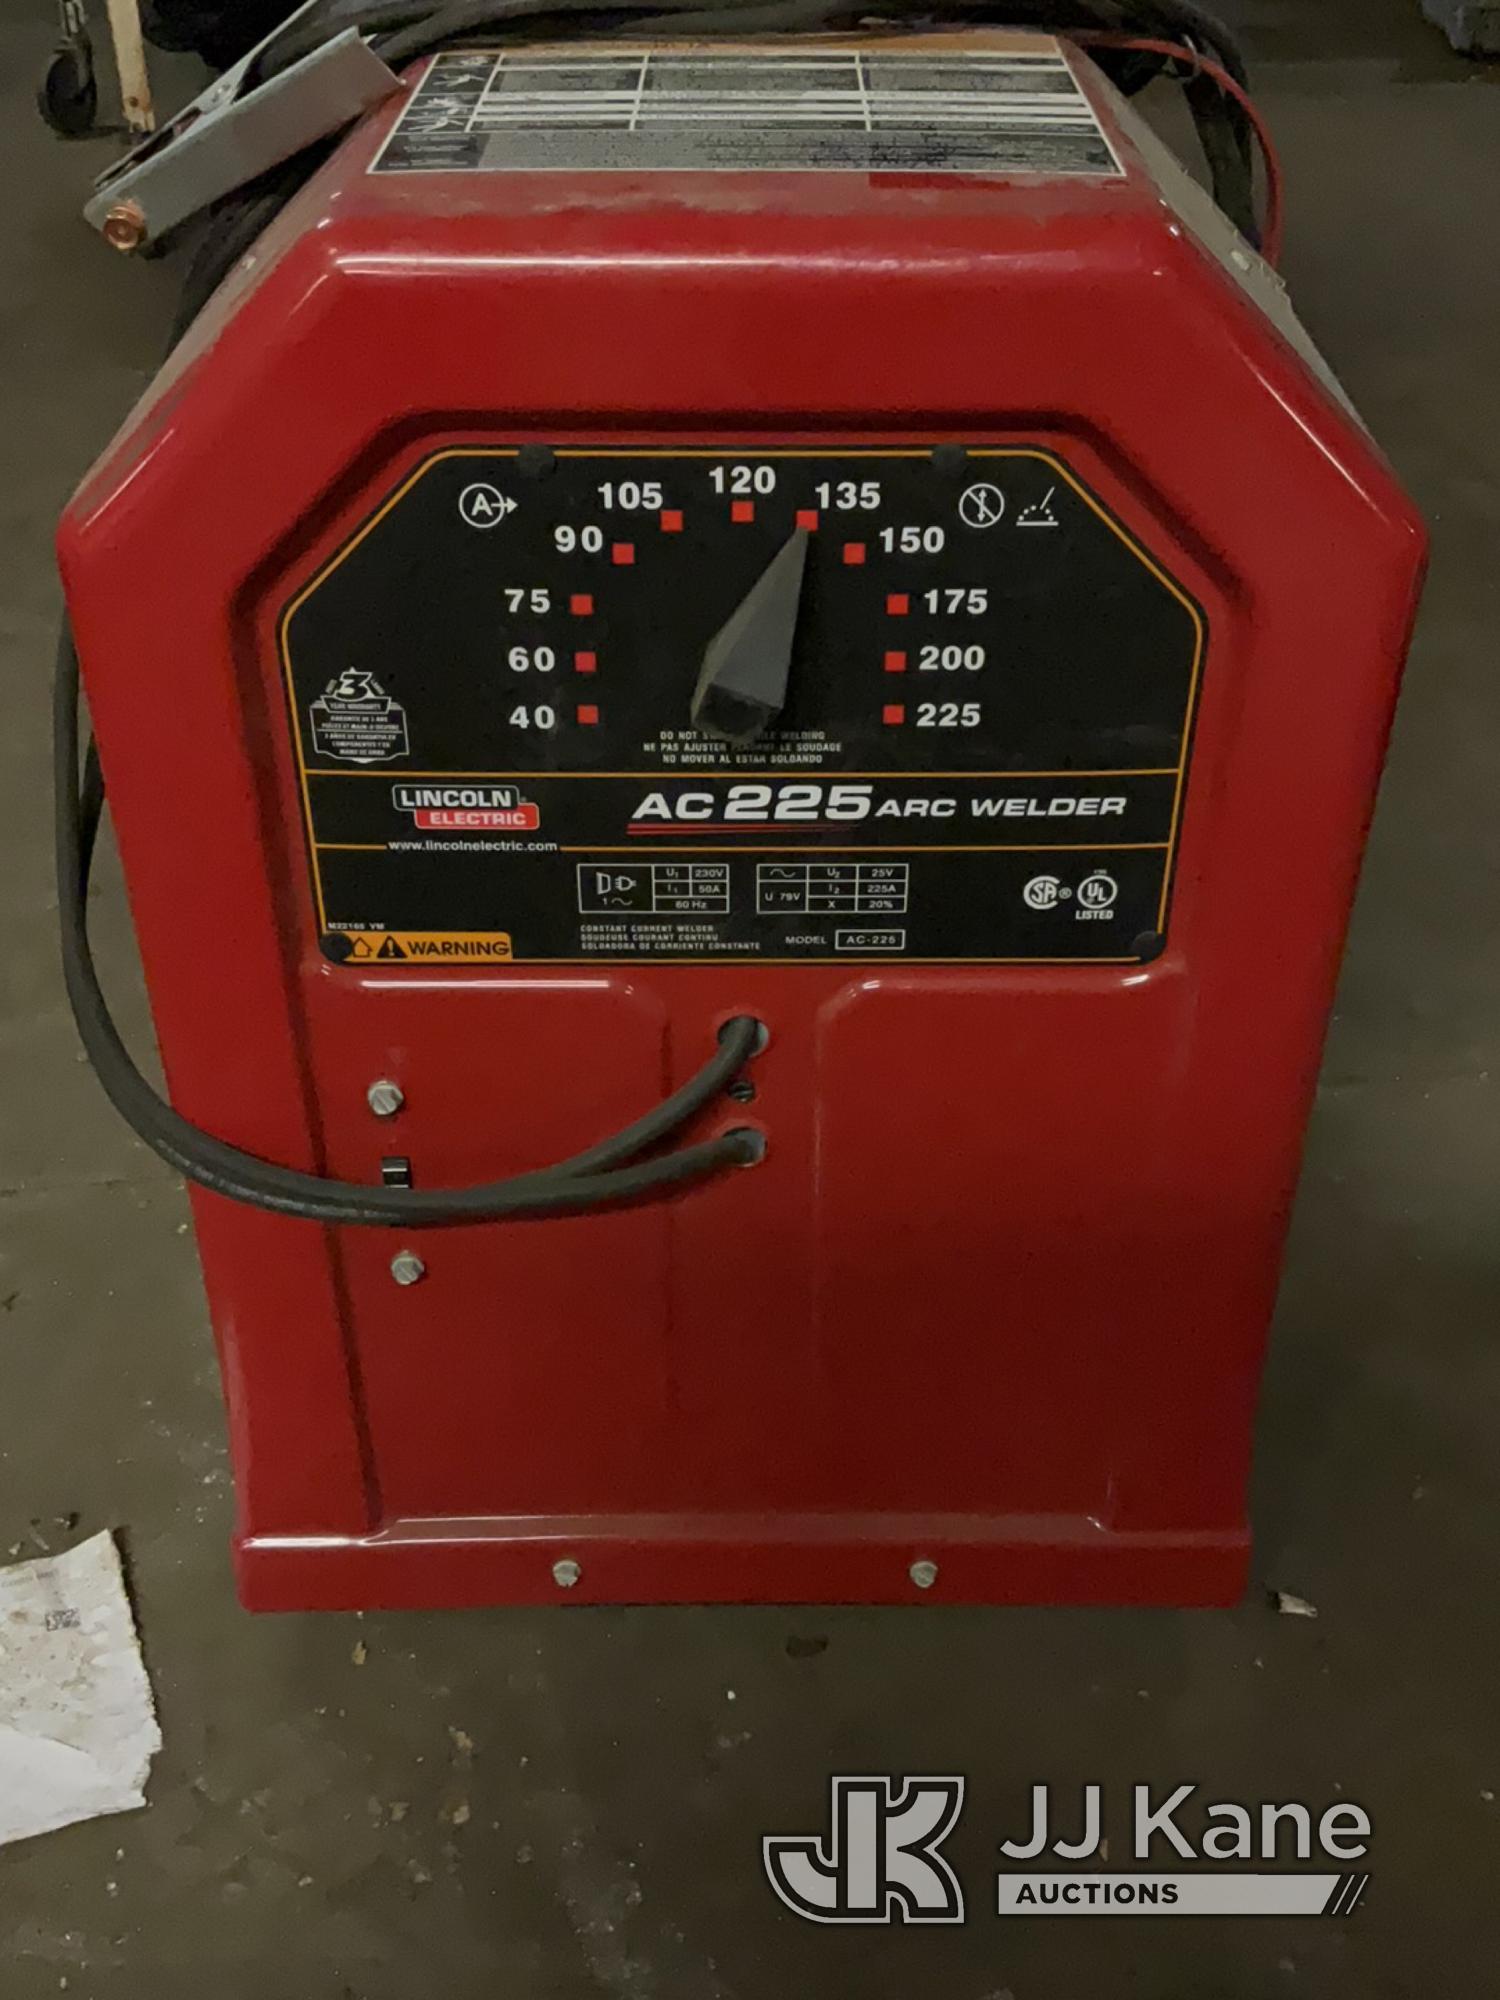 (Harvey, IL) Lincoln Electric AC225 Arc Welder (Condition Unknown ) NOTE: This unit is being sold AS